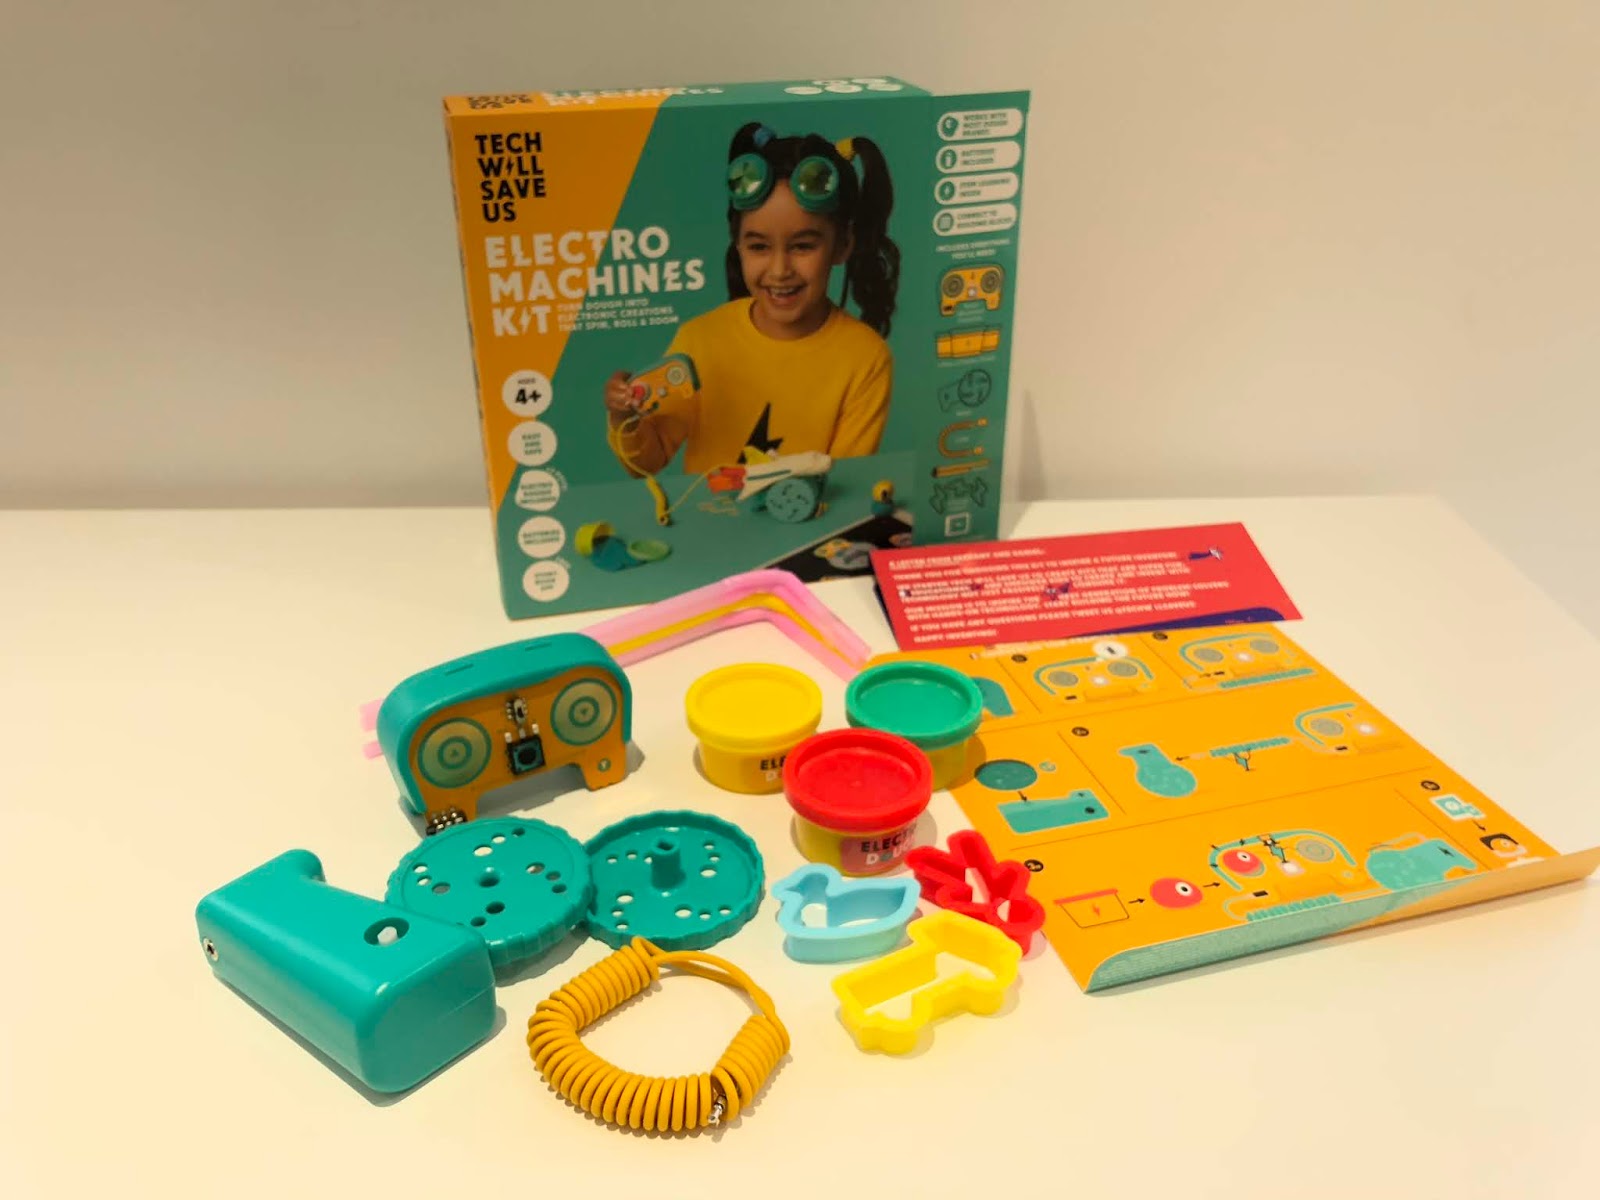 Tech Will Save Us Techno Sounds and Bright Creatures Kit Educational STEM Toy 